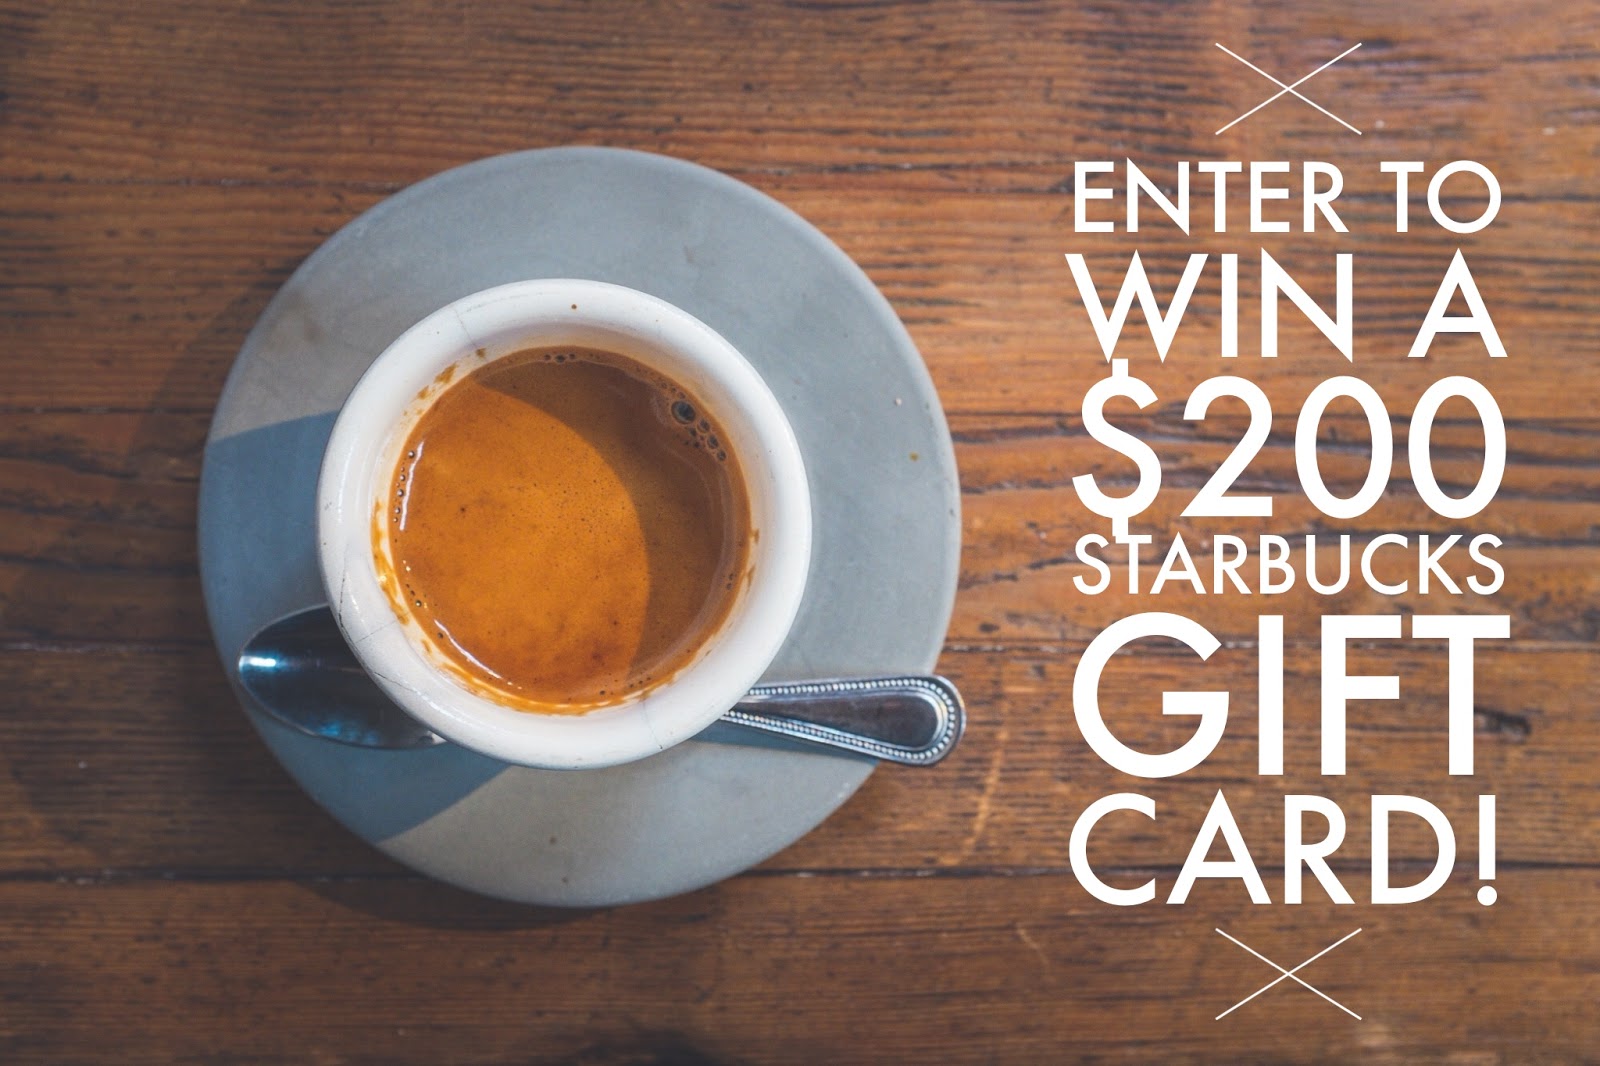 $200 Starbucks Gift Card Giveaway #giftcard #giveaway #starbucks